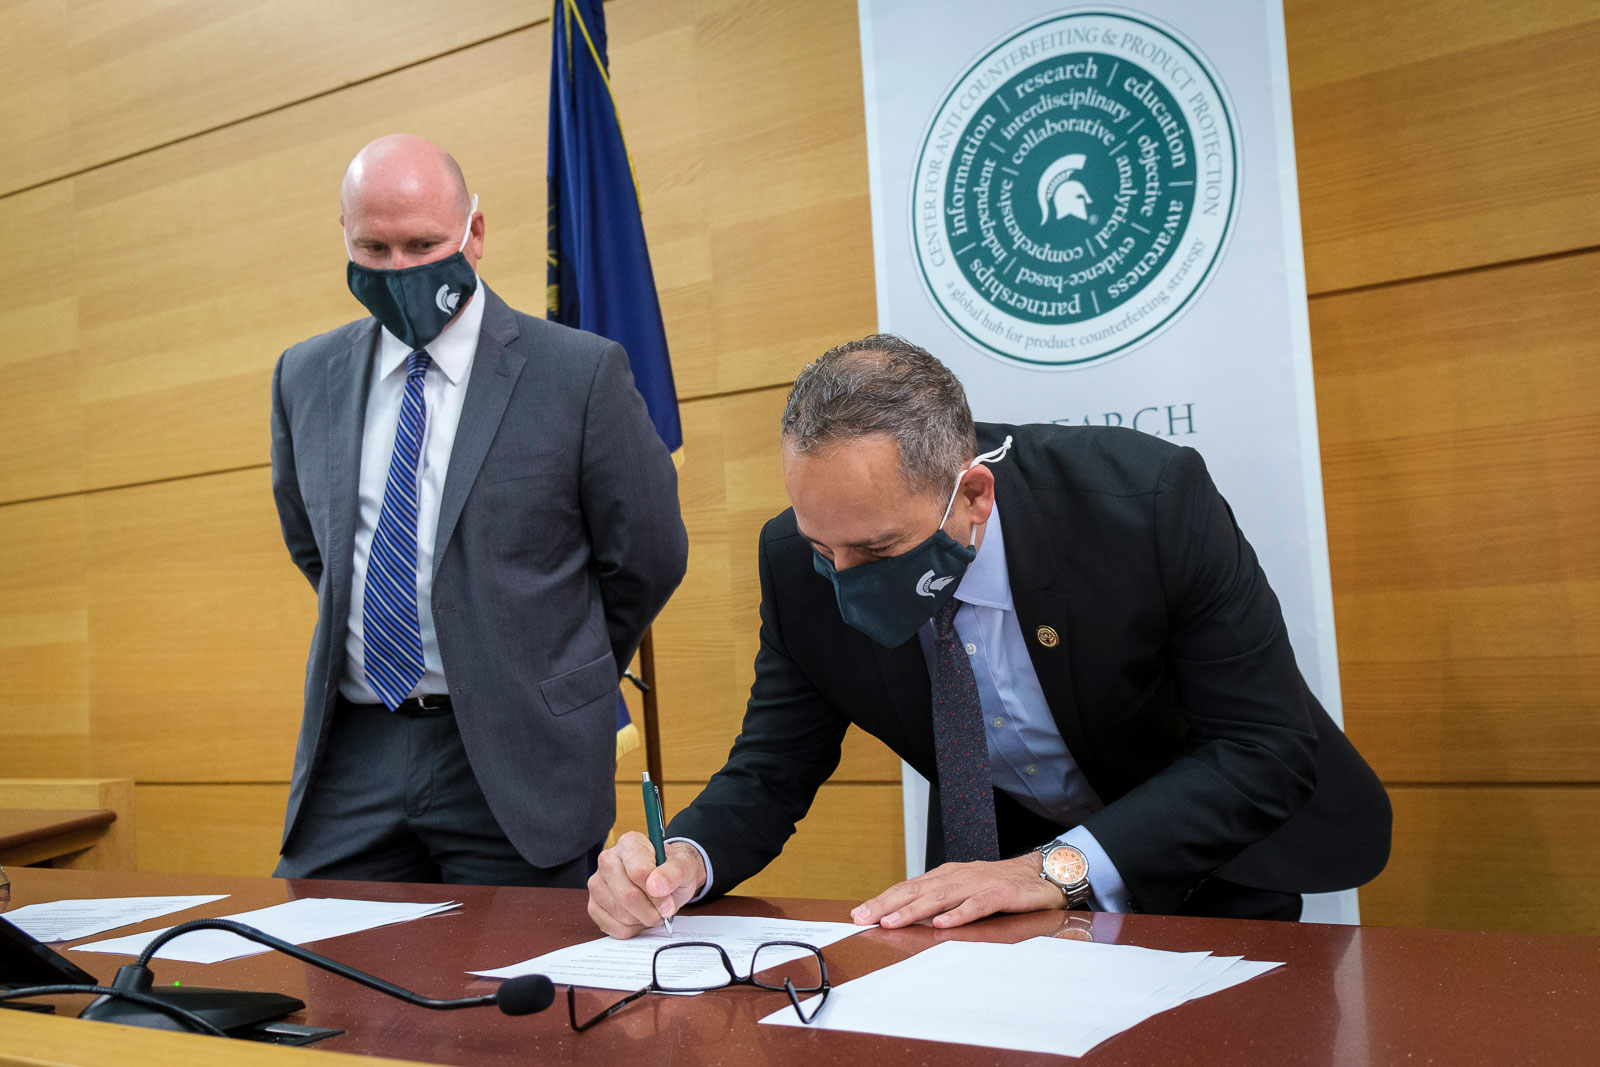 Jeff Rojek and Steve Francis sign an agreement between MSU ACAPP Center and IPR Center at the College of Law on August 27, 2020.